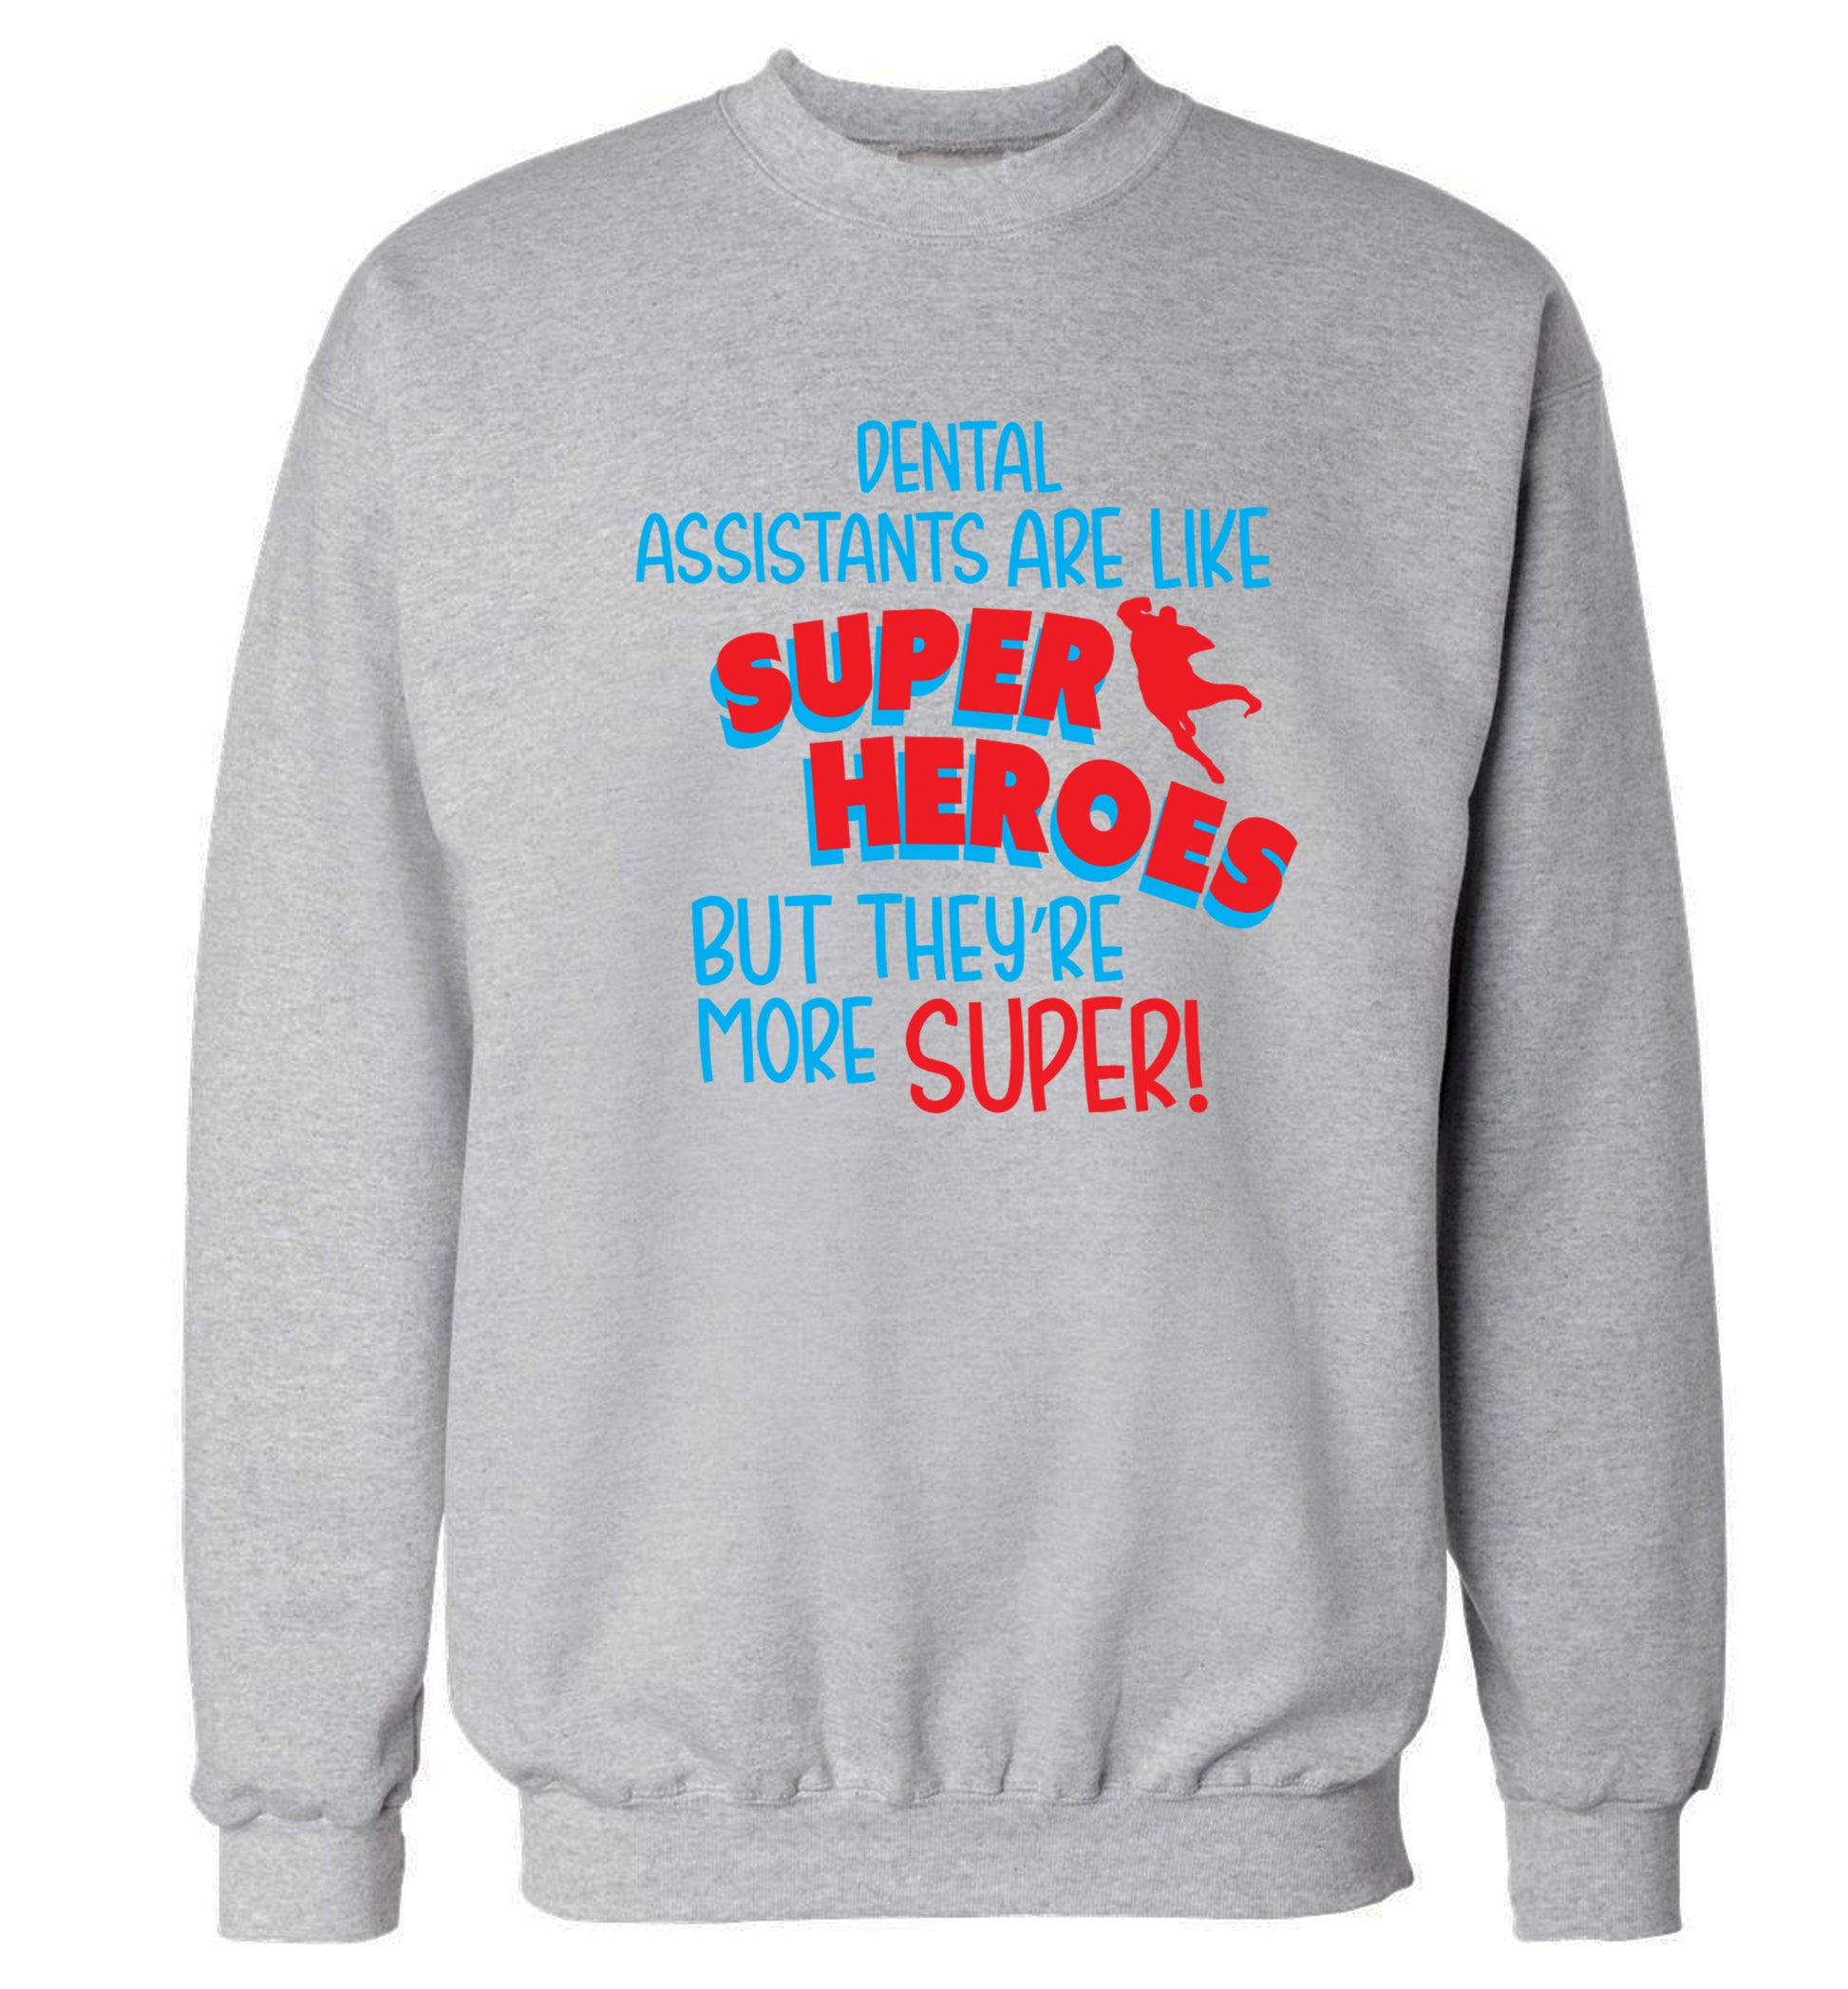 Dental Assistants are like superheros but they're more super Adult's unisex grey Sweater 2XL